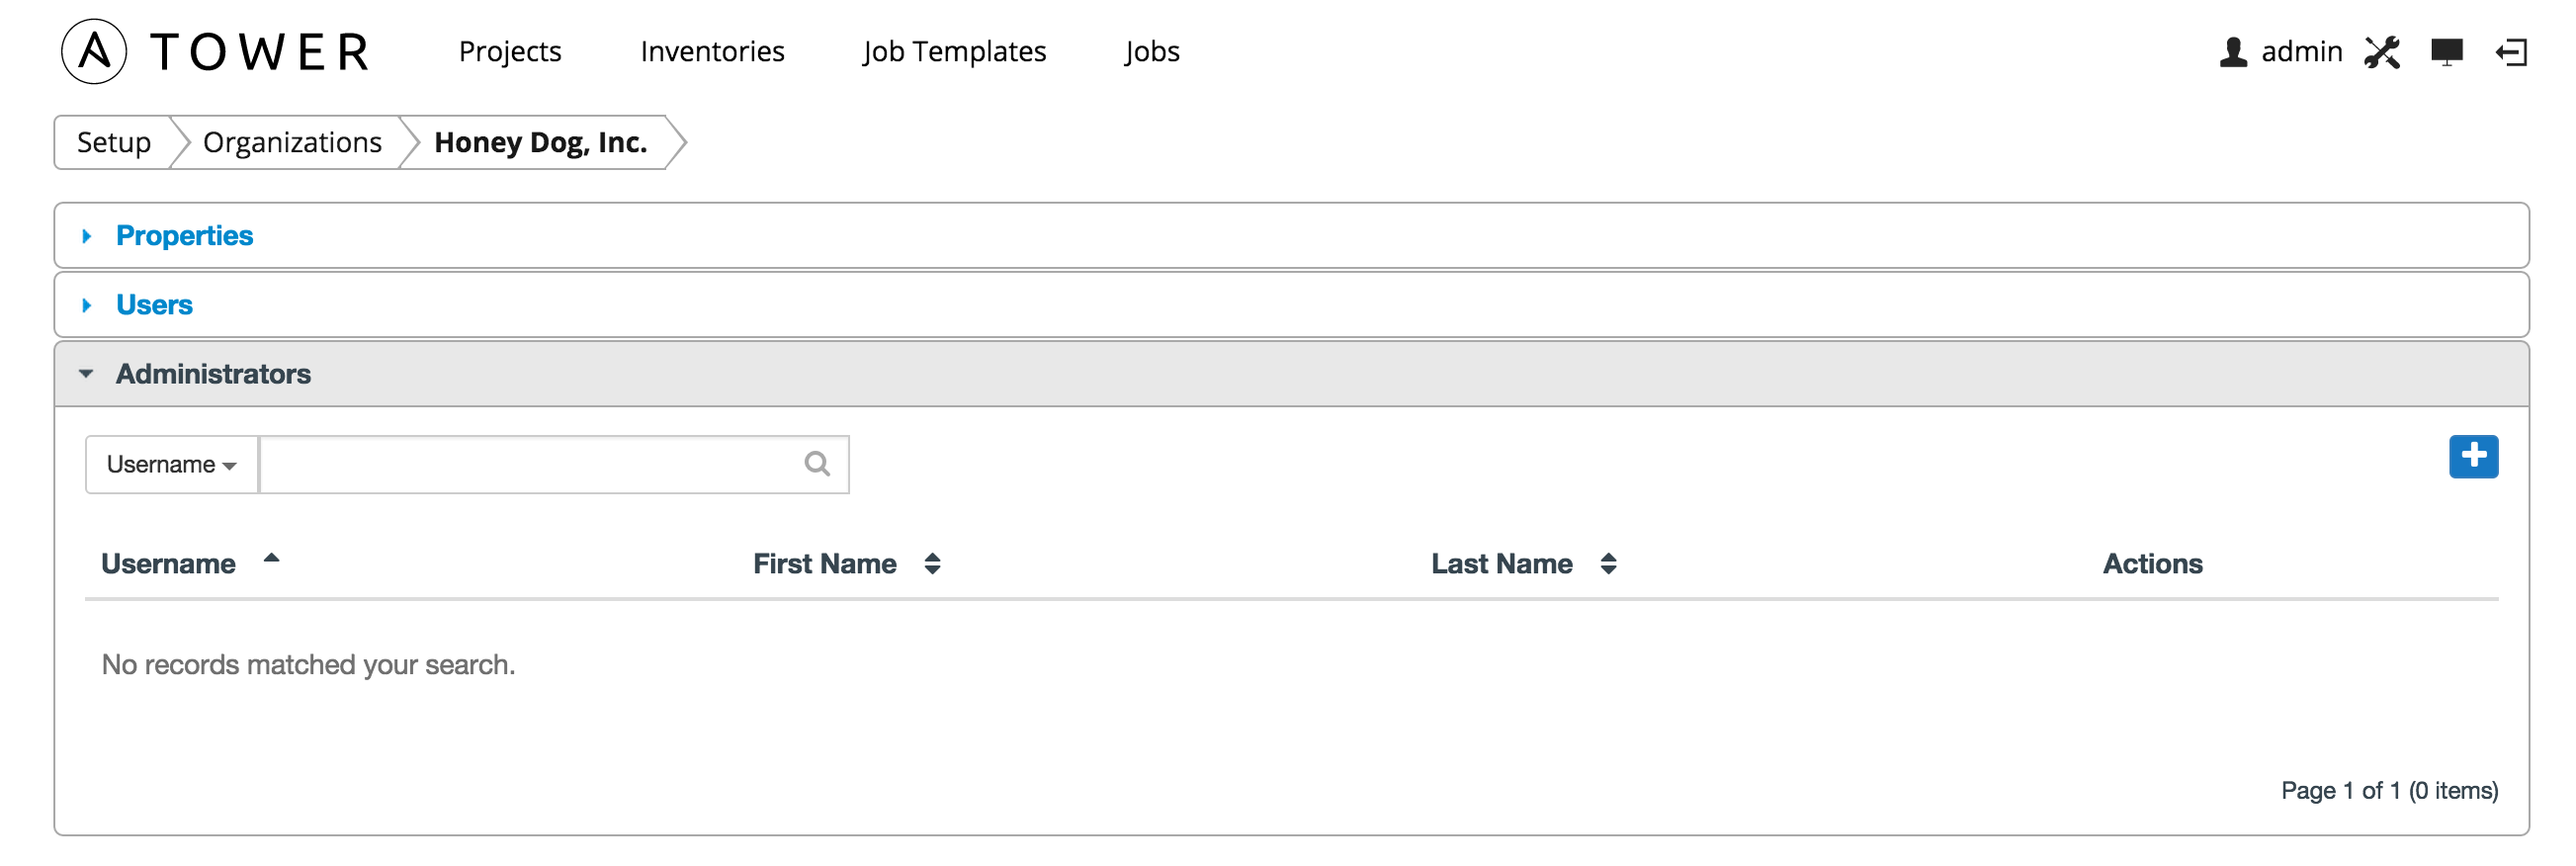 Organizations - show administrators for example organization